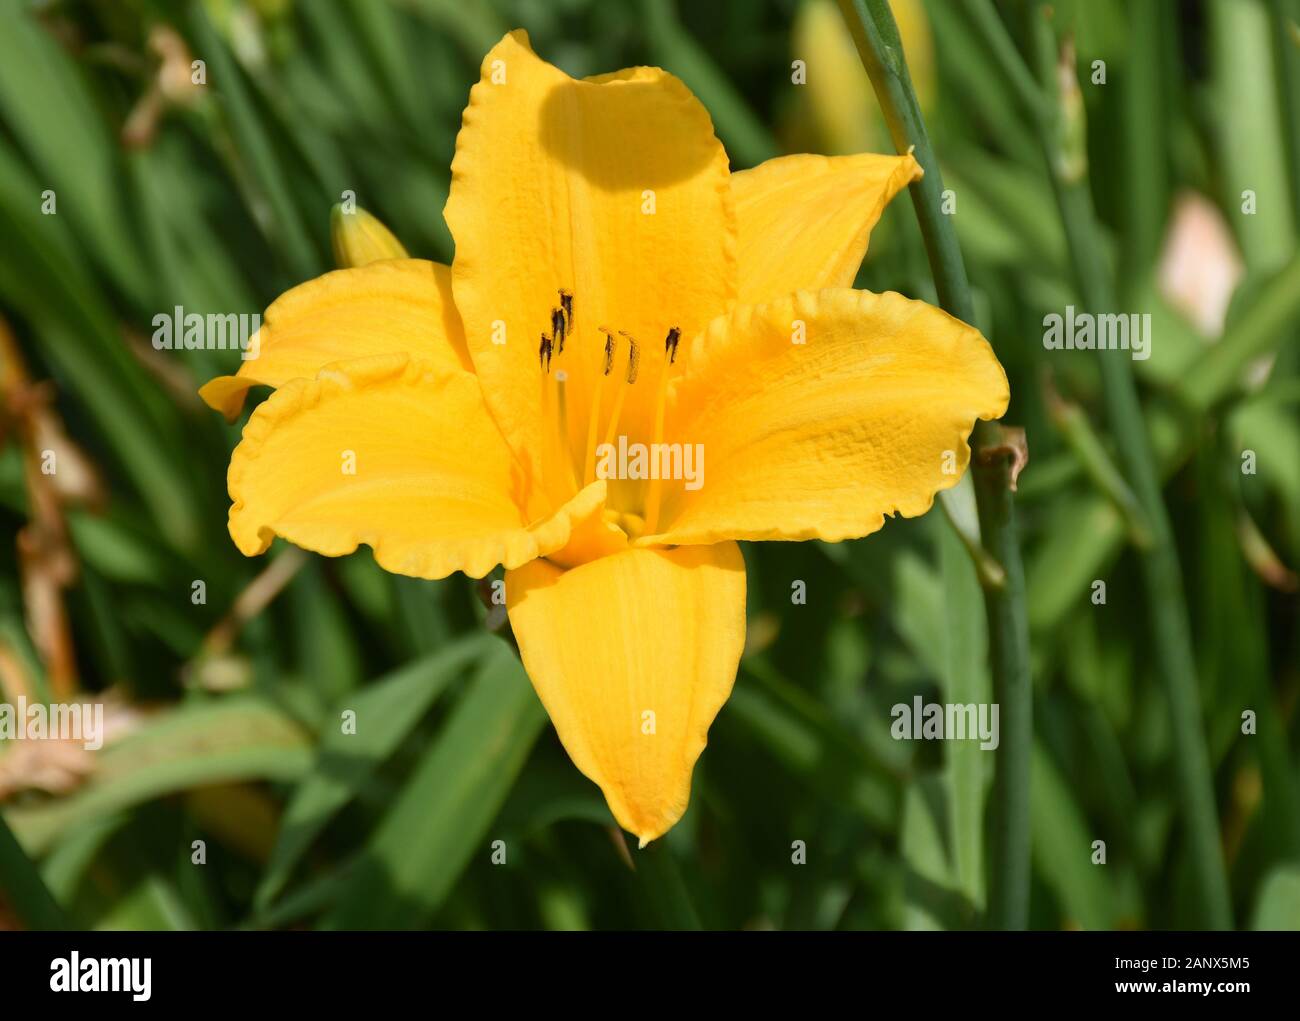 Garden with a brilliant bright yellow flowering daylily. Stock Photo